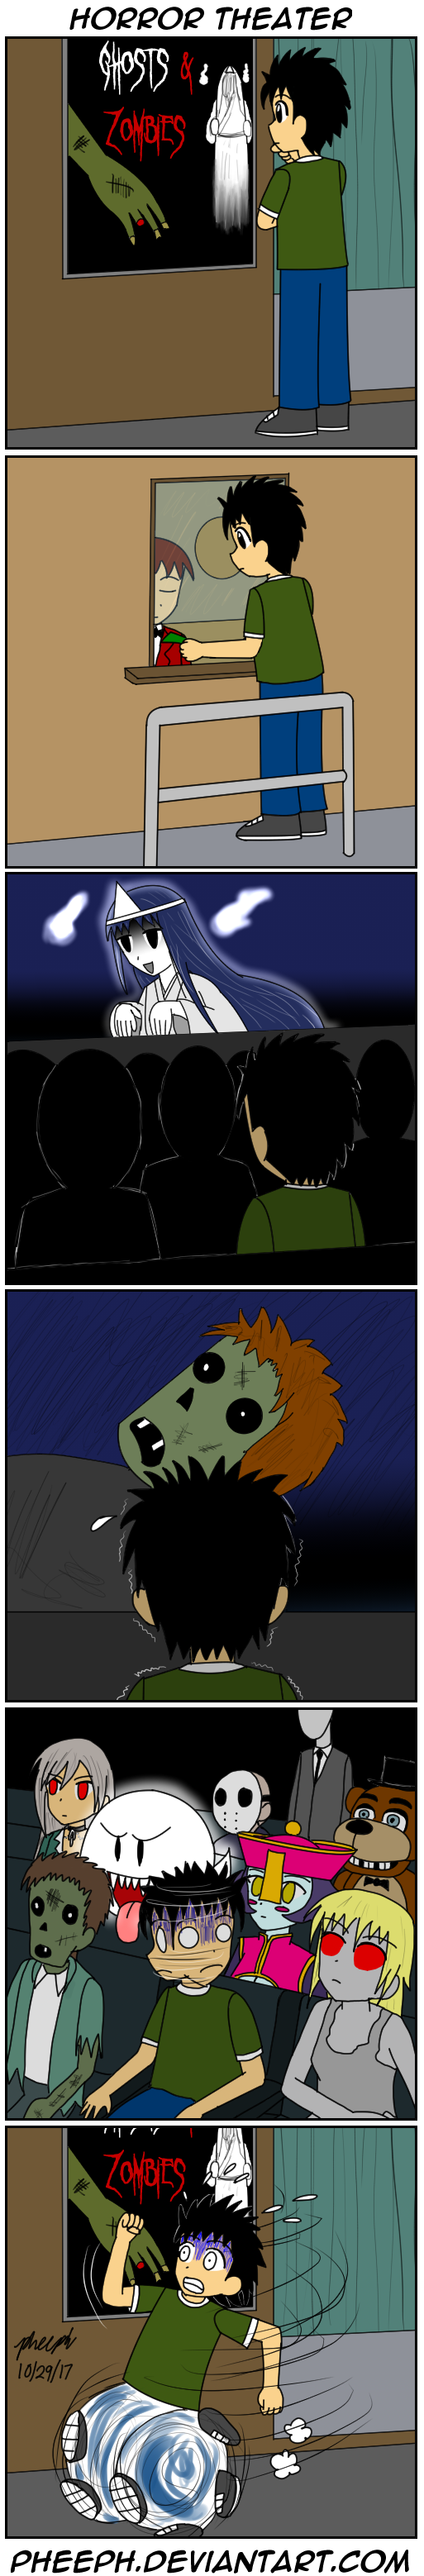 Page 39 - Horror Theater